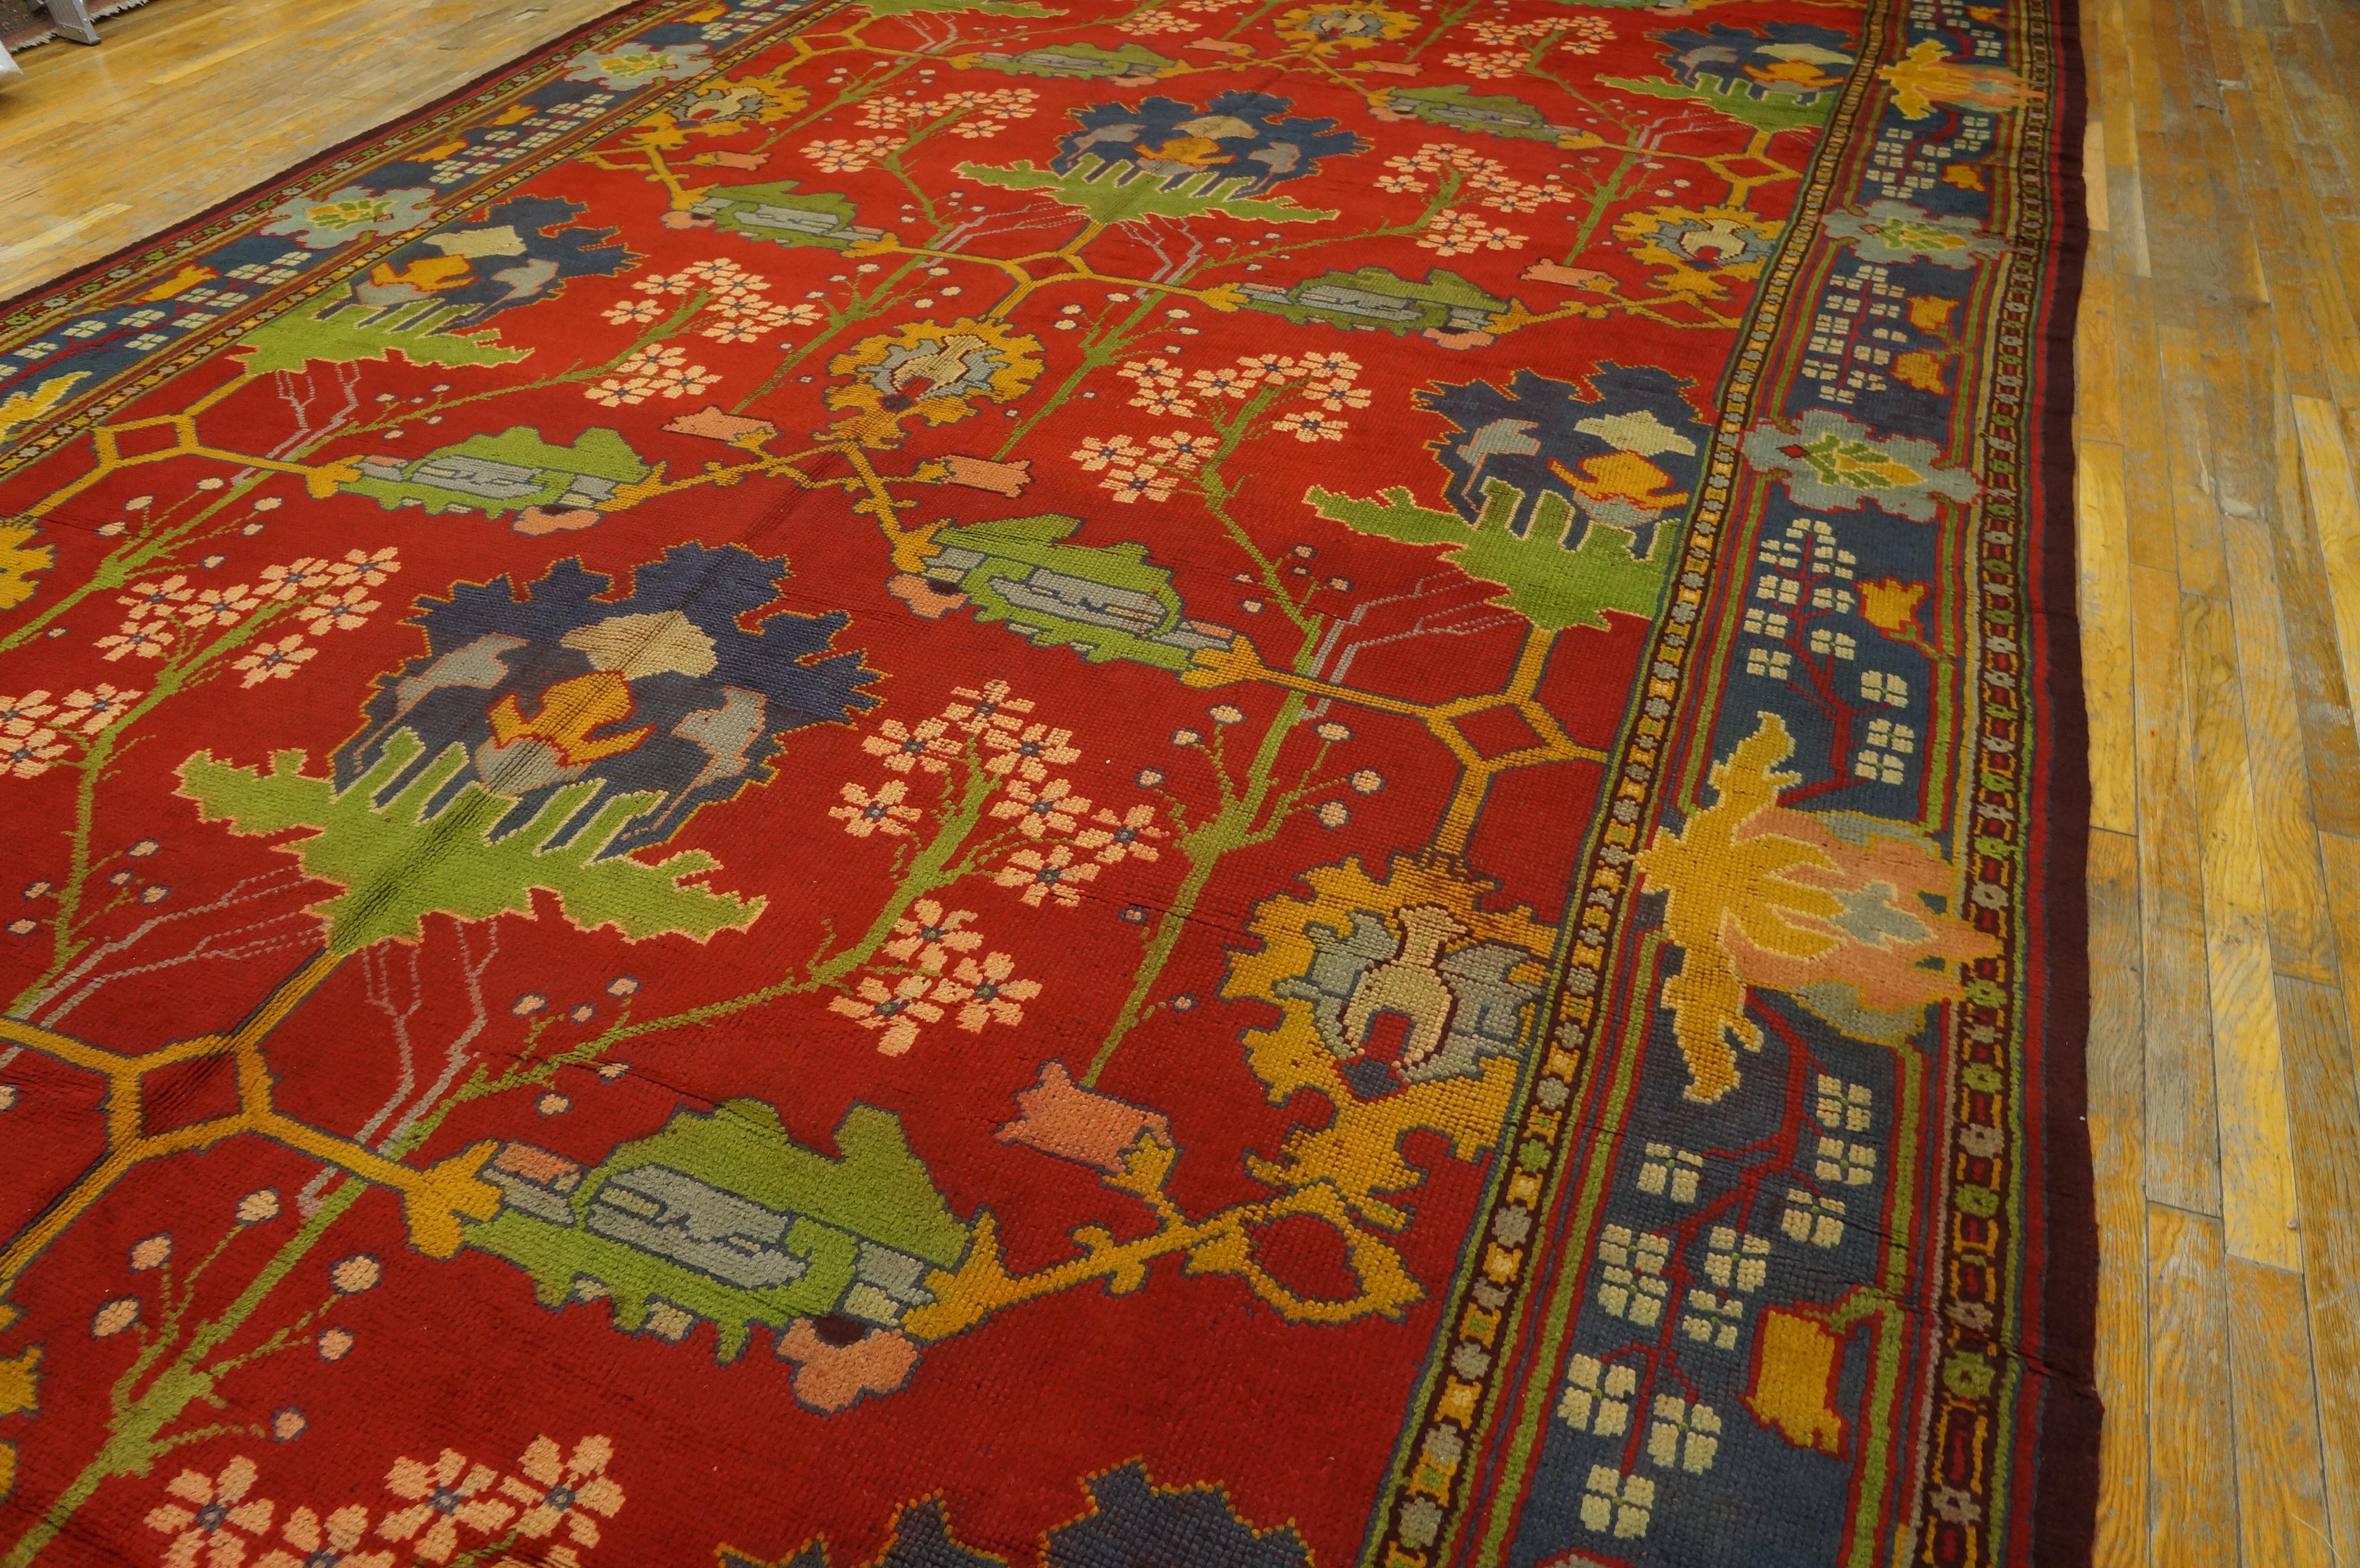 Early 20th Century Donegal Arts & Crafts Carpet Designed by Gavin Morton
10' x 20' - 305 x 610 cm